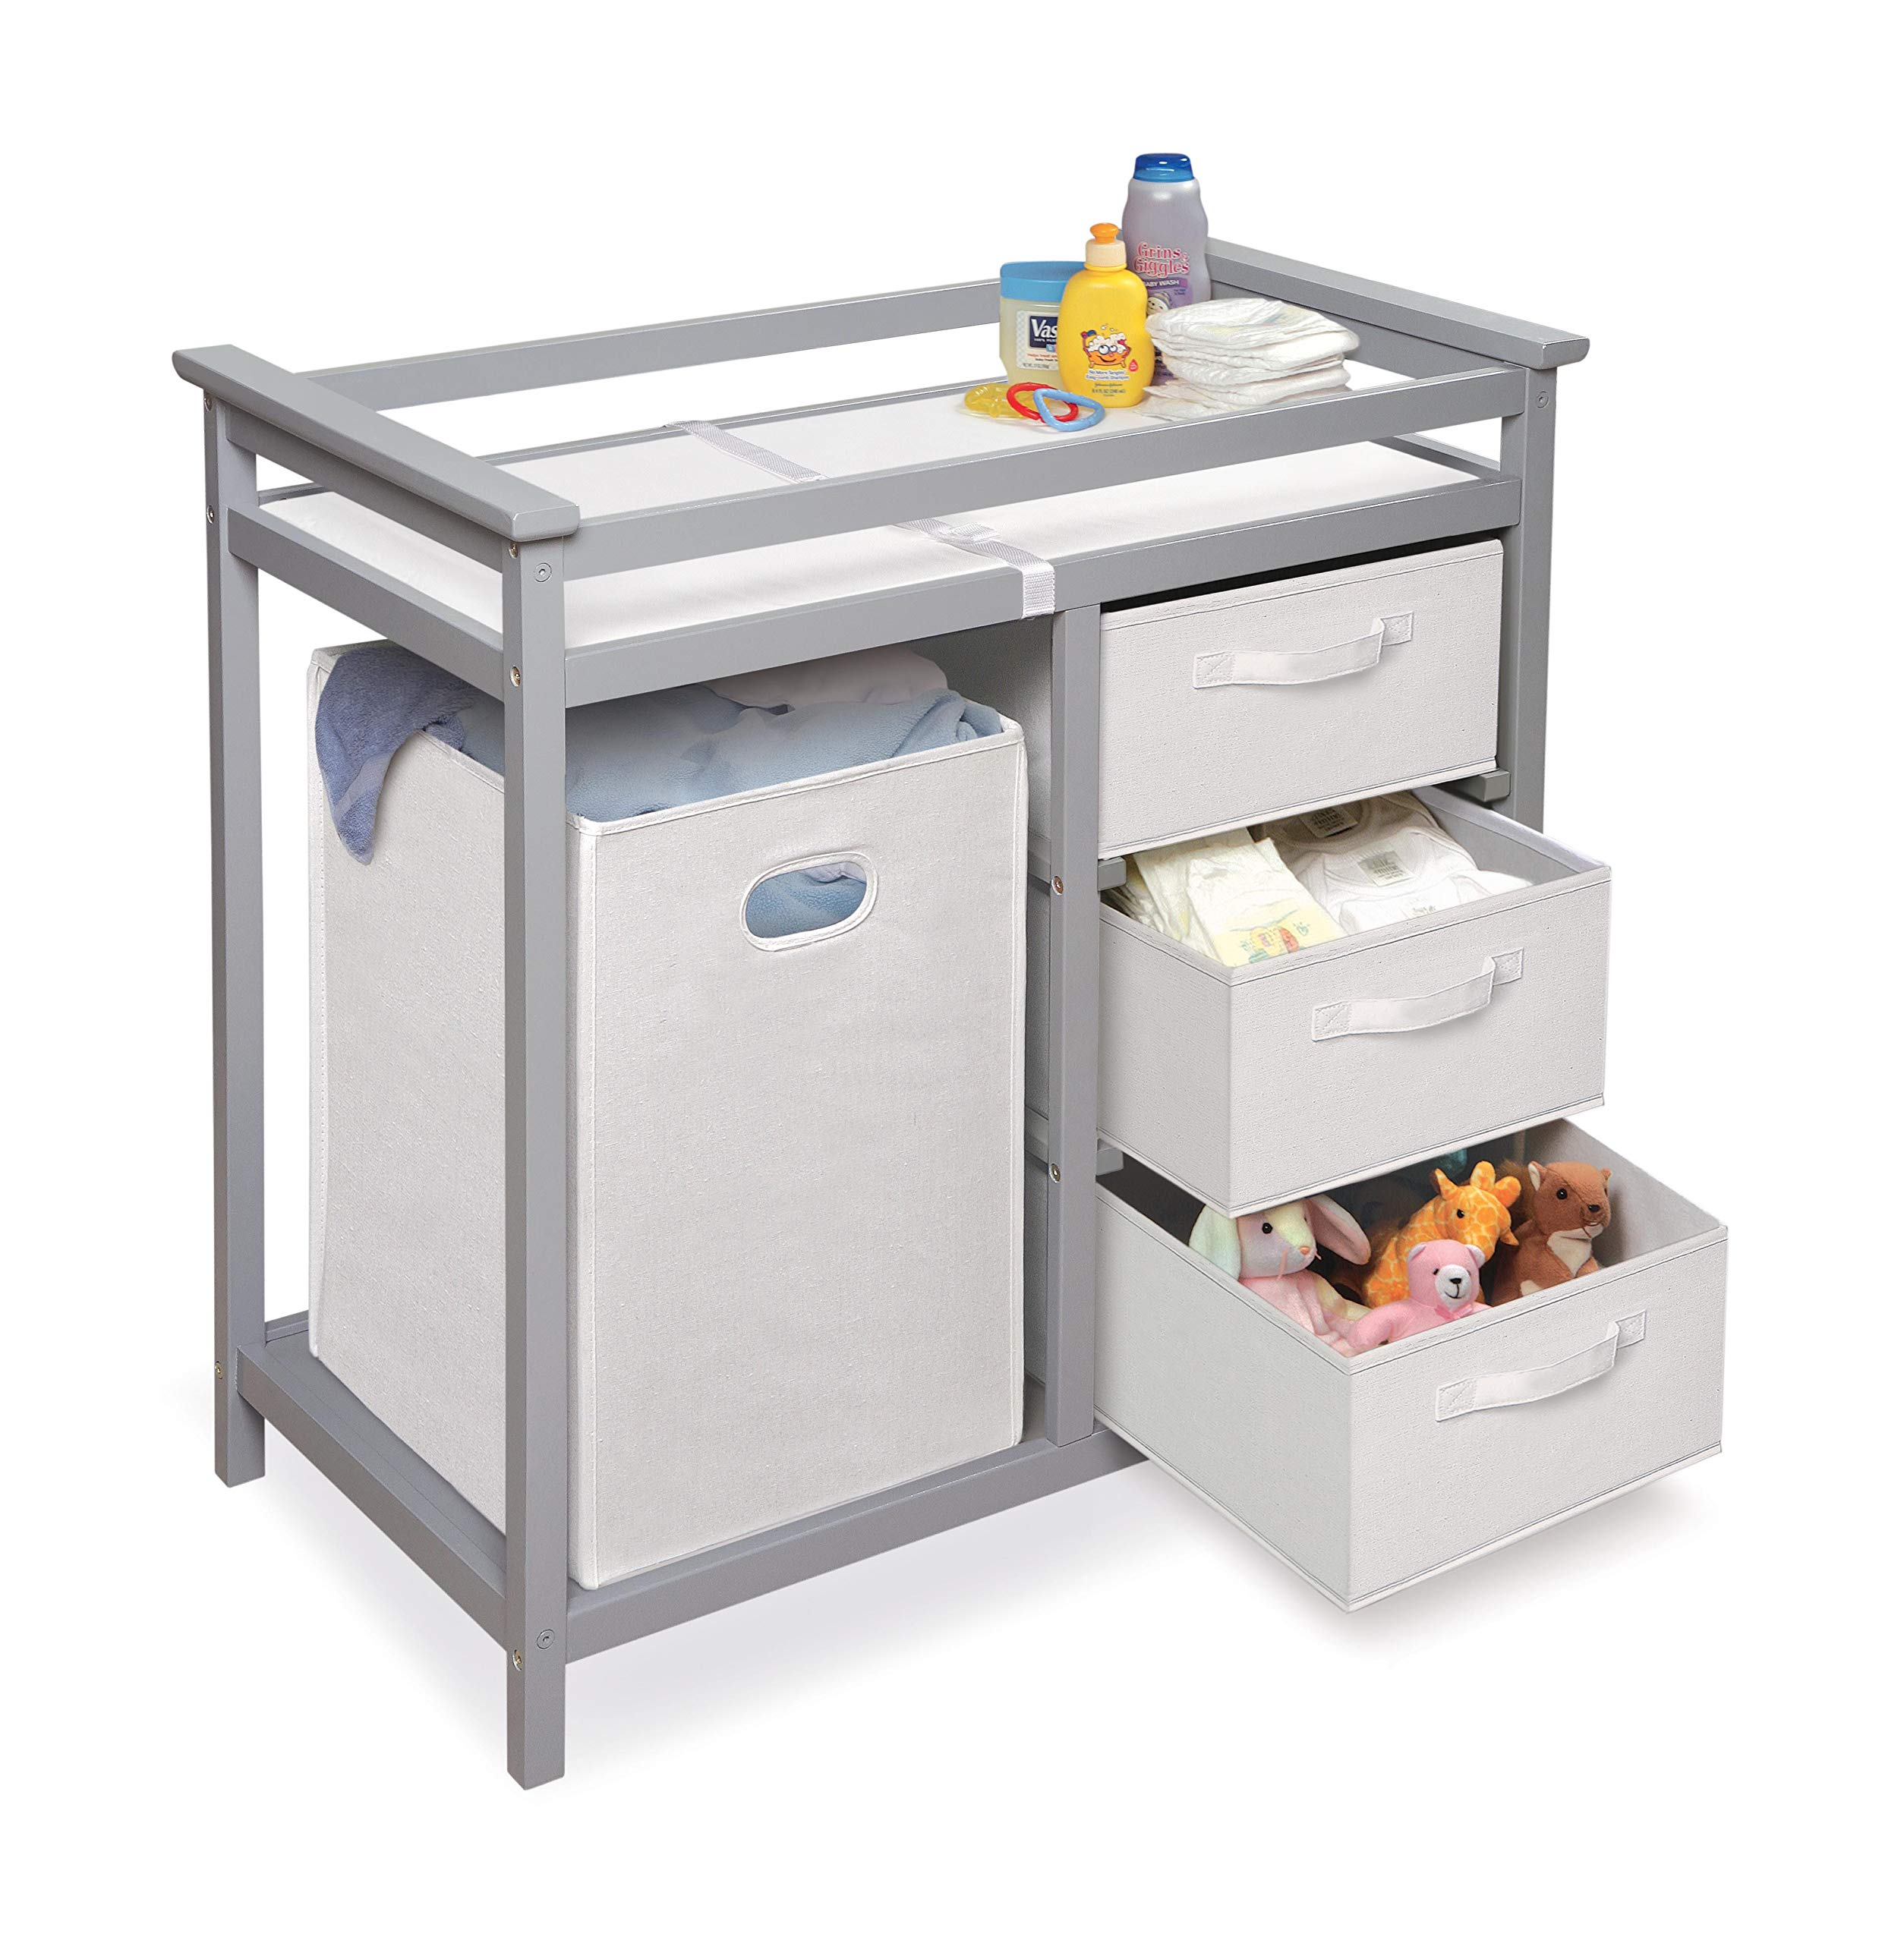 Modern Baby Changing Table with Laundry Hamper, 3 Storage Baskets, and Pad